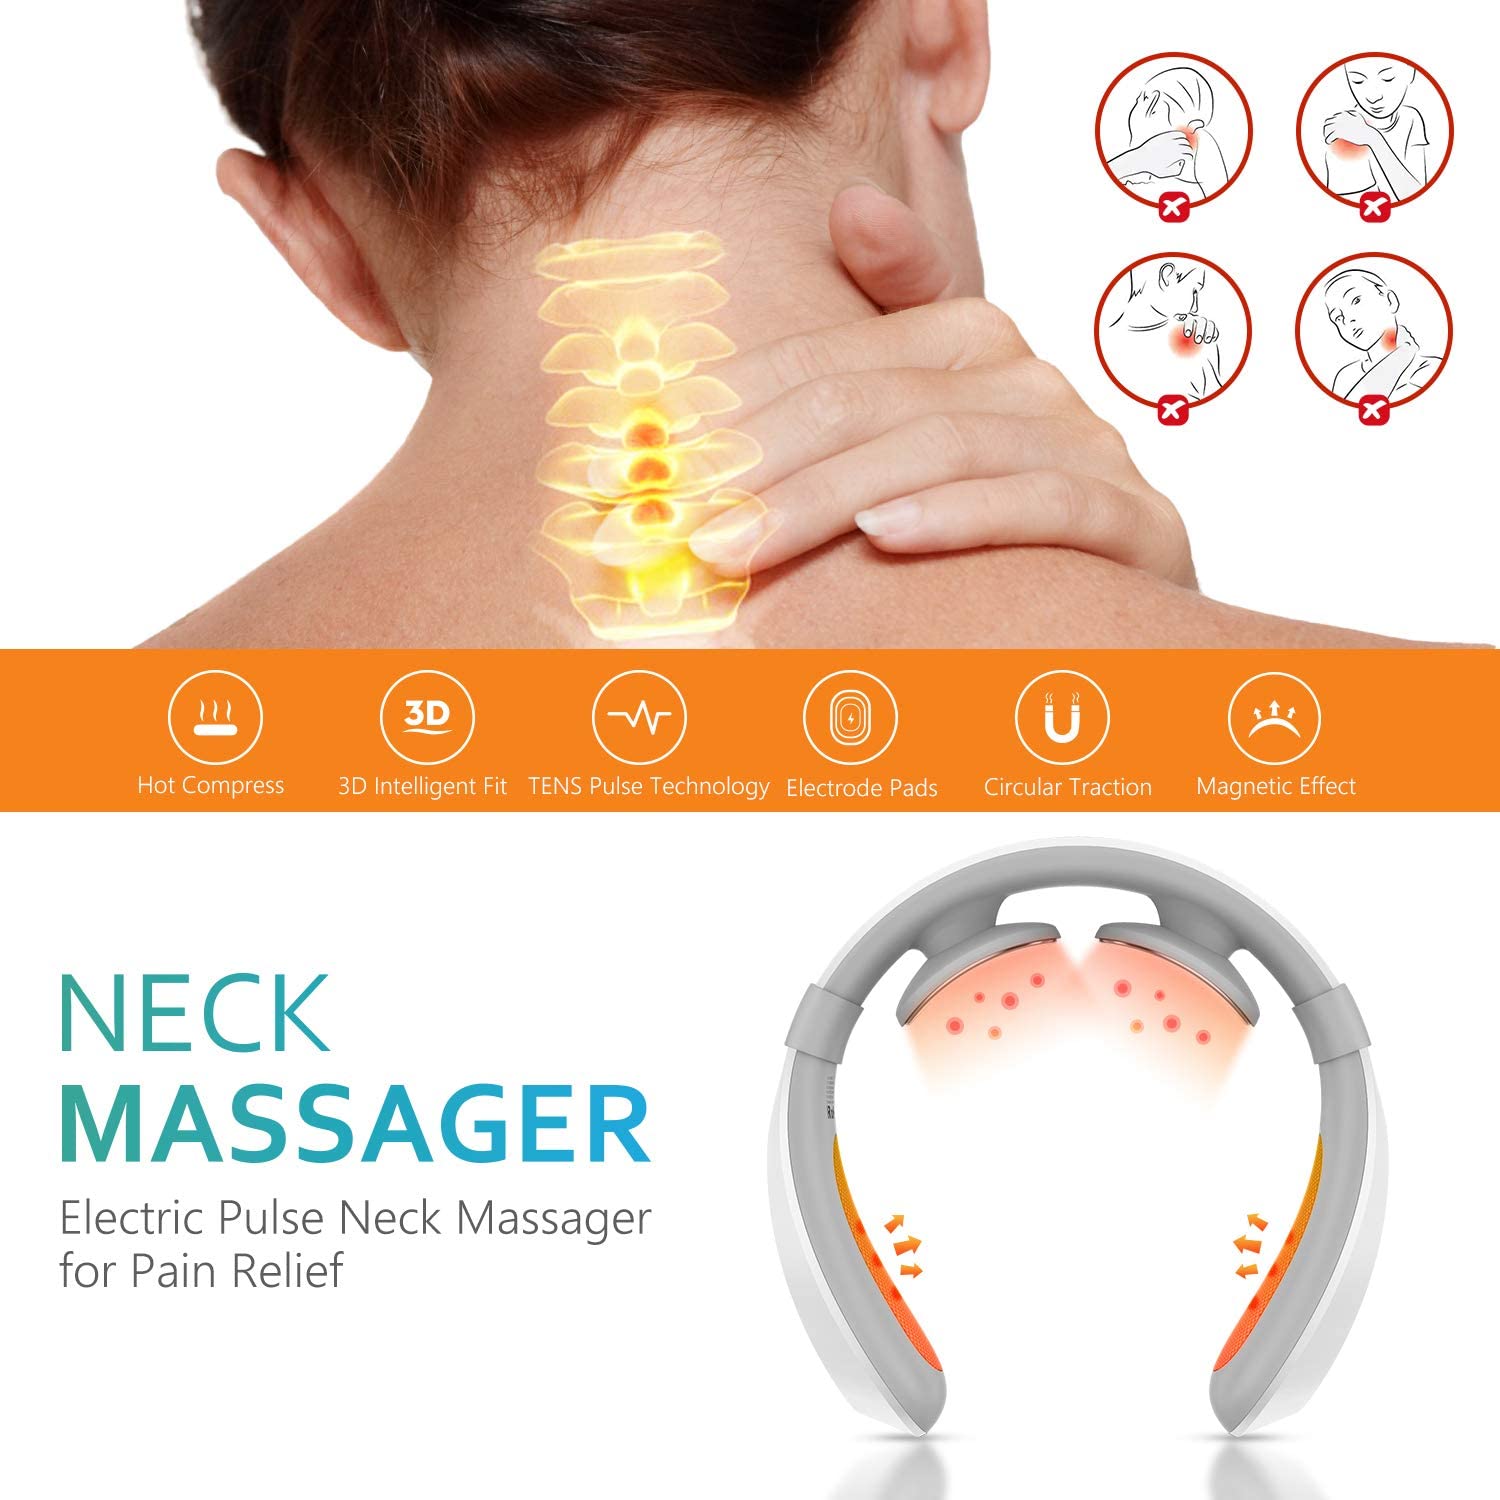 Neck Massager with Heat, Pain Relief, Cordless Intelligent Massager for Neck  Relax, 4 Pads, 4 Modes 10 Levels Portable Deep Tissue Trigger Point Massager,  Heated Neck Massage Therapy